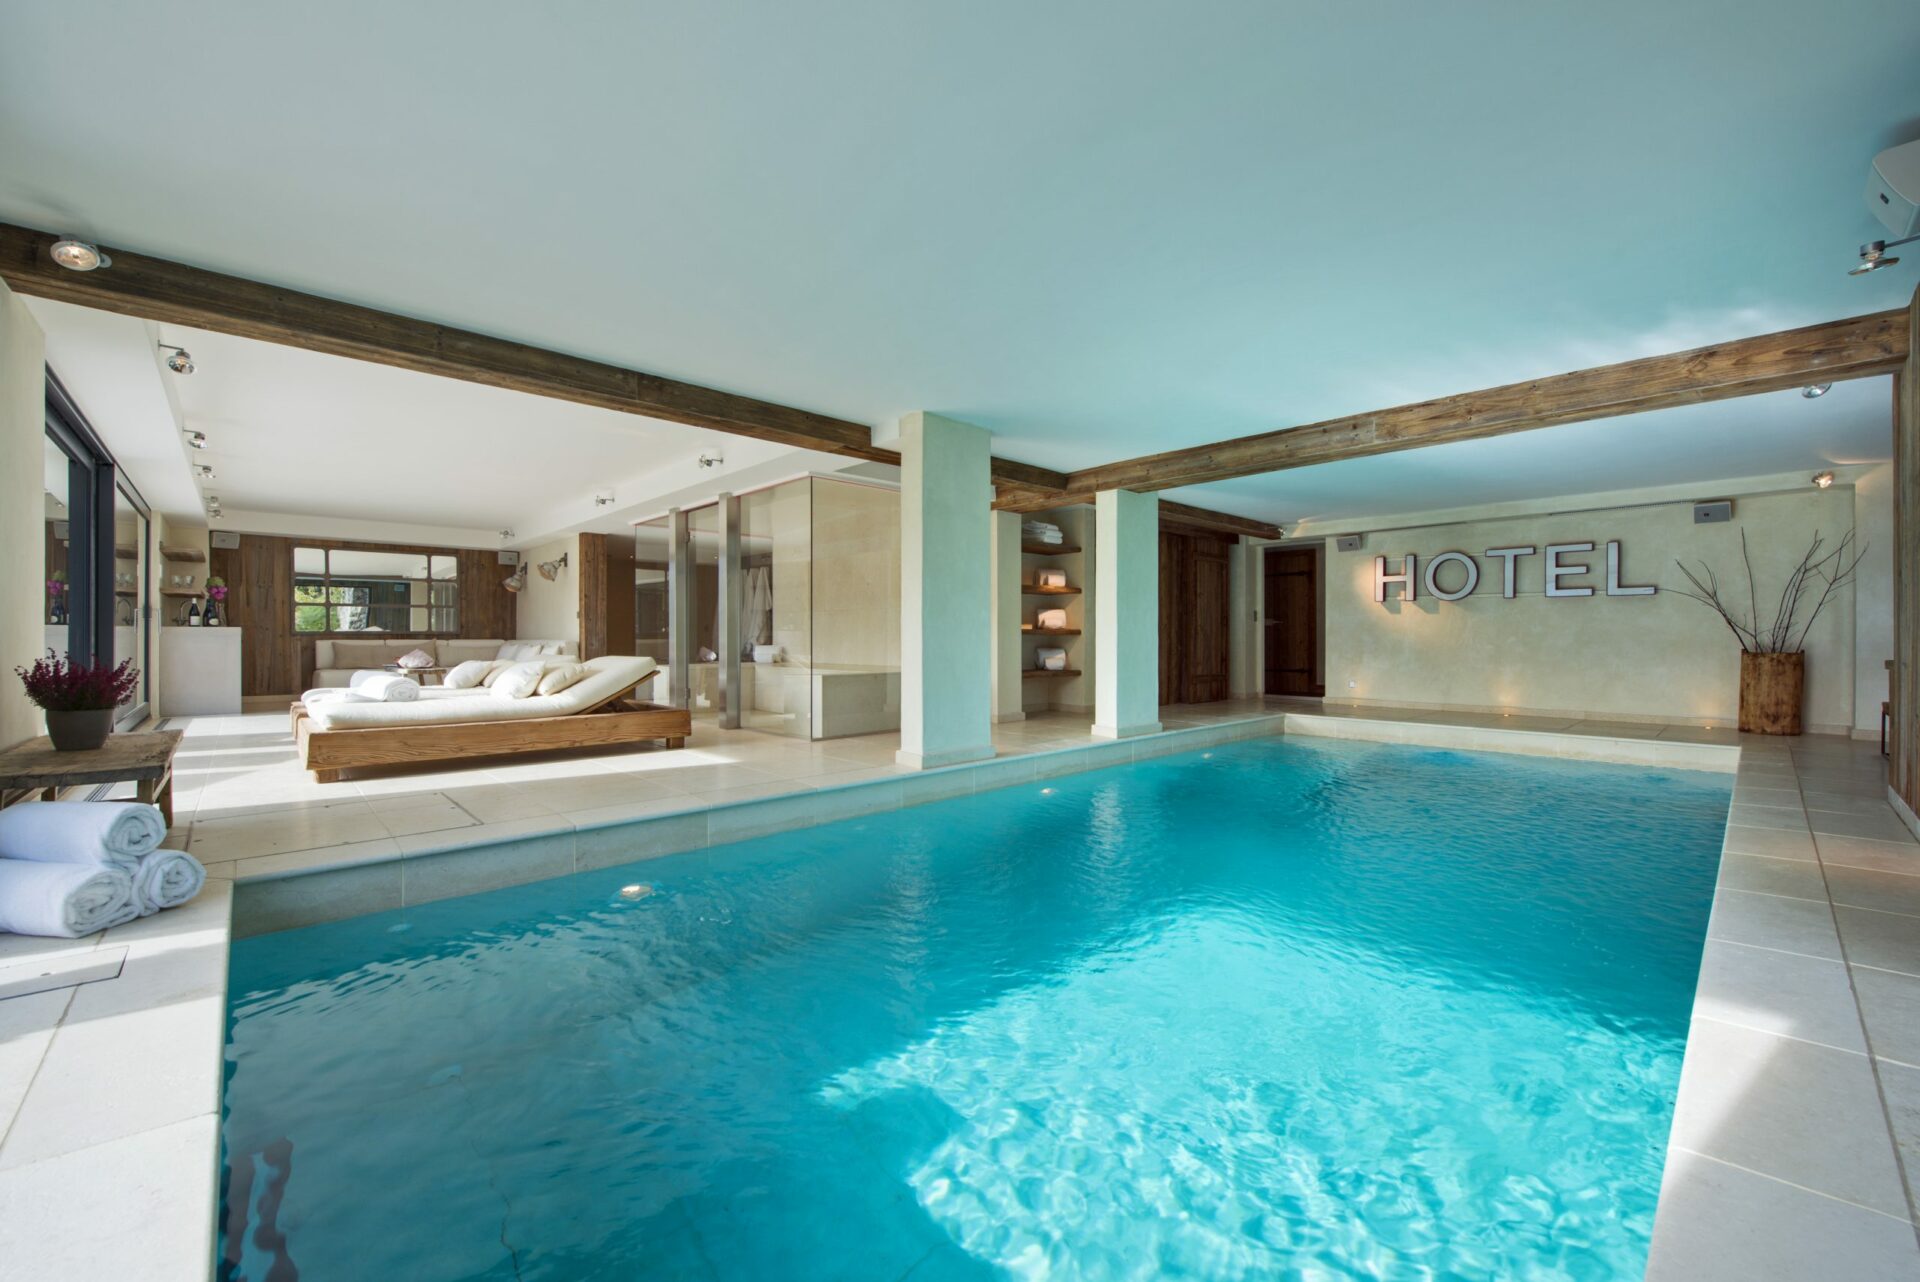 Wellness area with indoor swimming pool at Chalet 1936 in Verbier, the Swiss ski resort